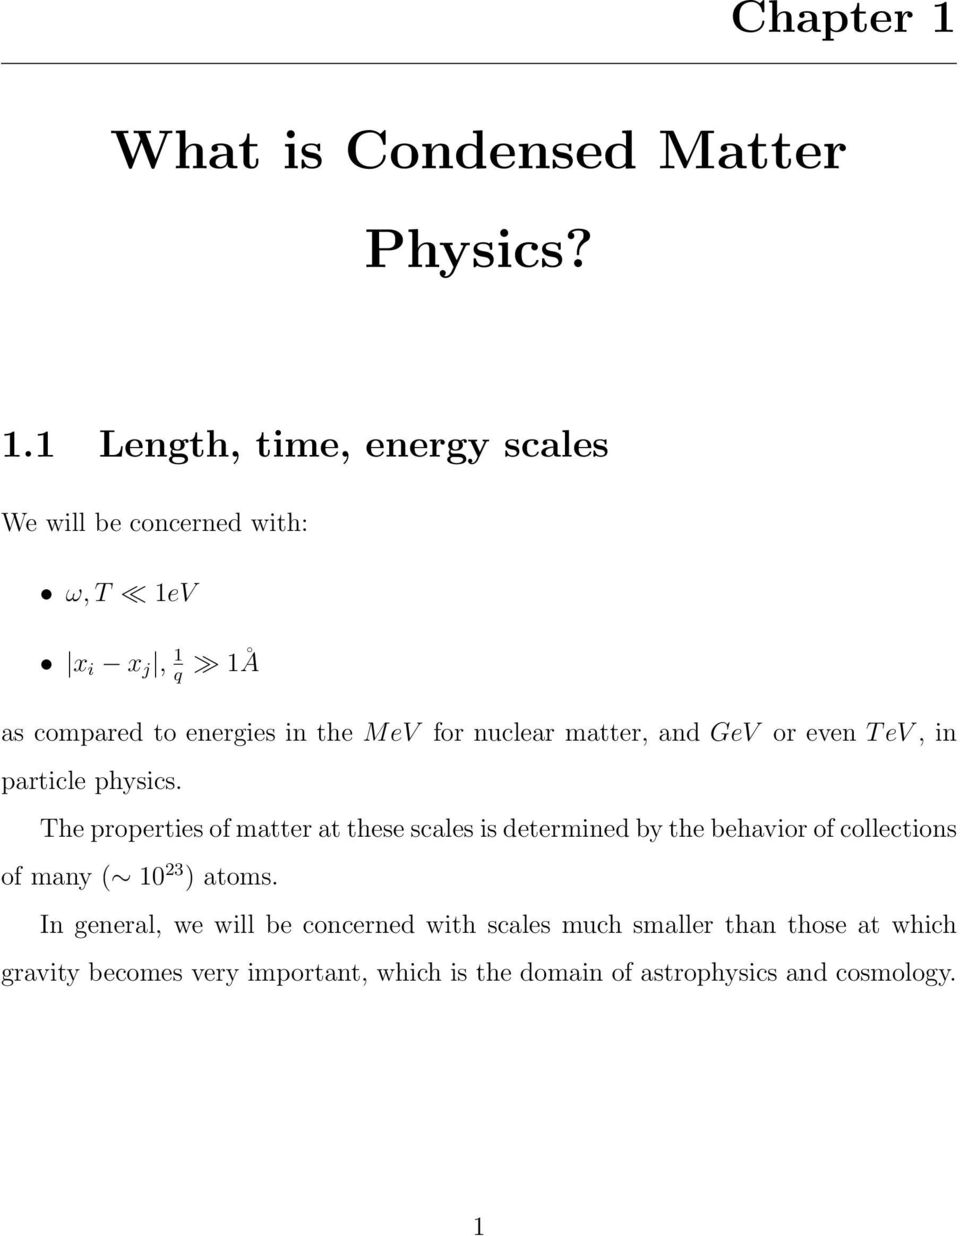 1 Length, time, energy scales We will be concerned with: ω, T 1eV x i x j, 1 1Å q as compared to energies in the MeV for